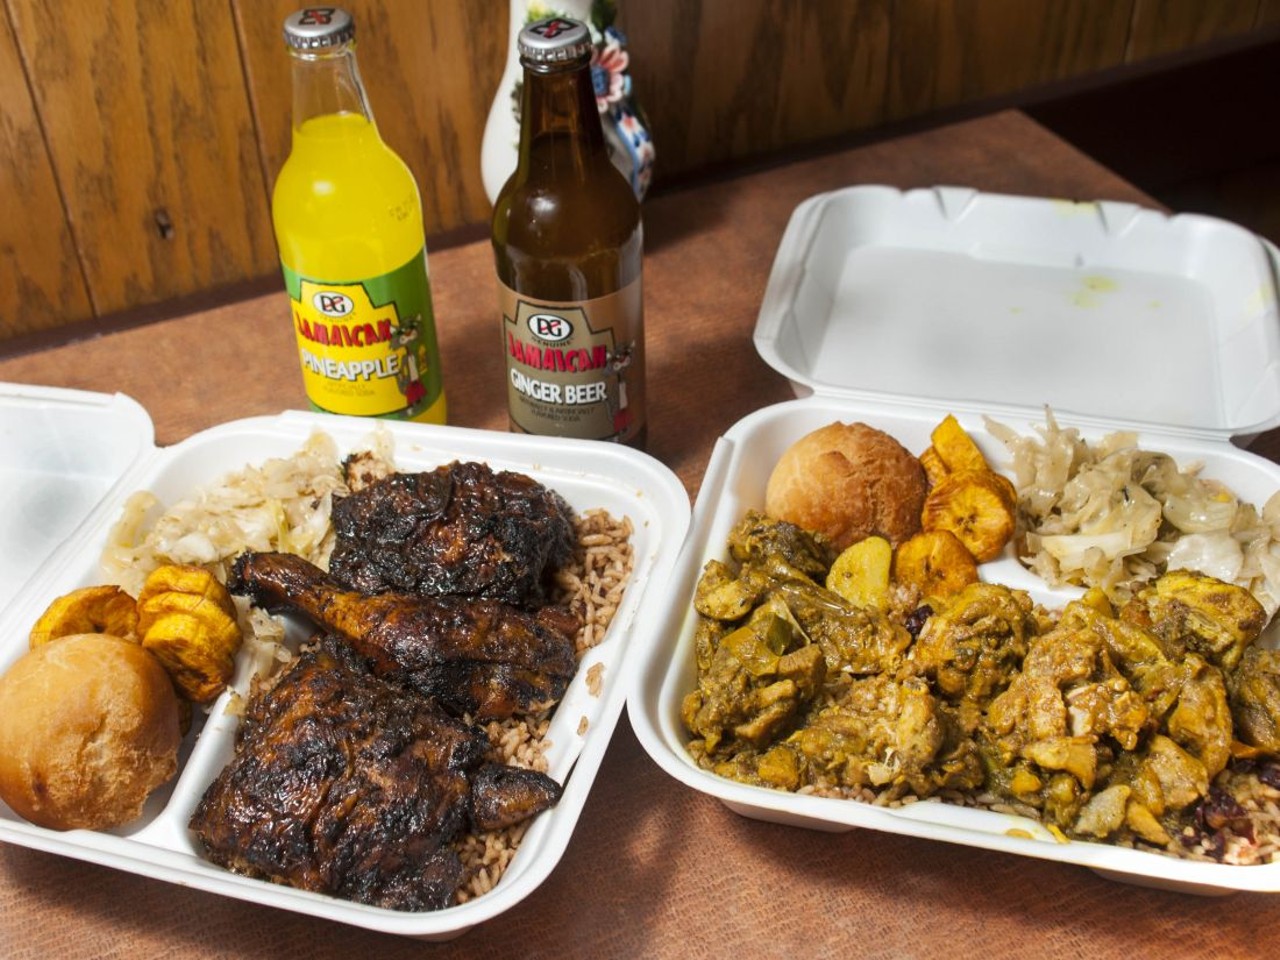 Jerk chicken (right) and the curry chicken from Jamaica Jamaica.